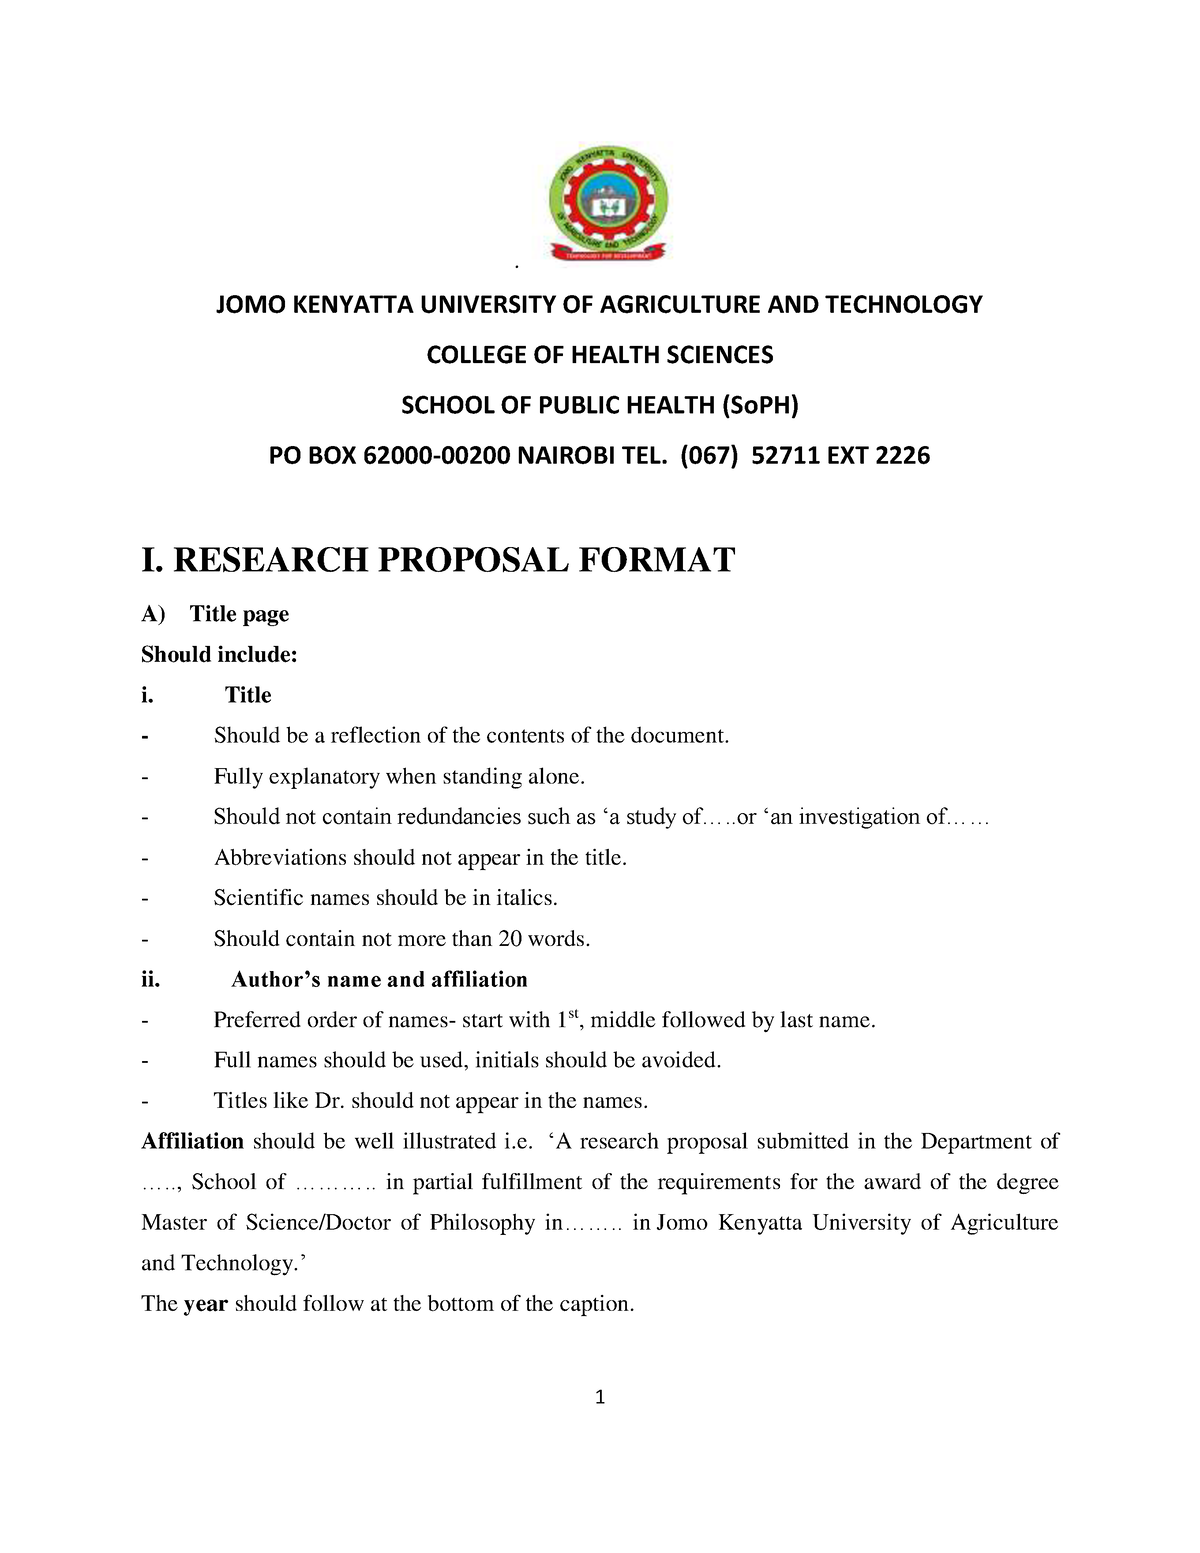 example of research proposal in kenya